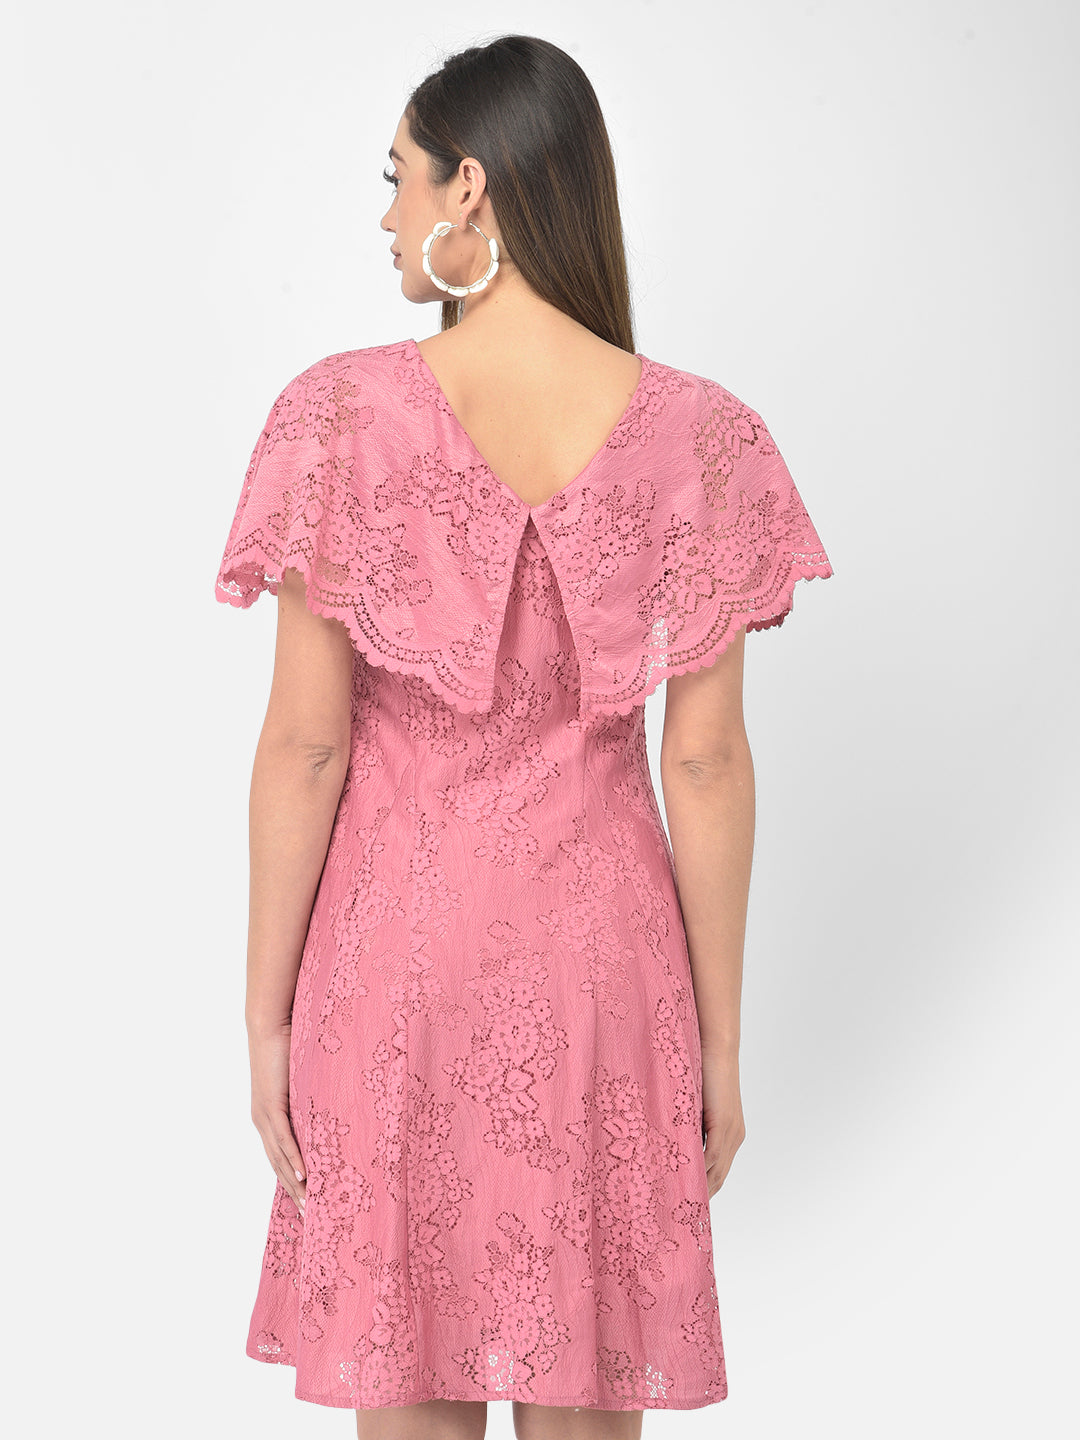 Pink Cap Sleeve A-Line Dress With Lace